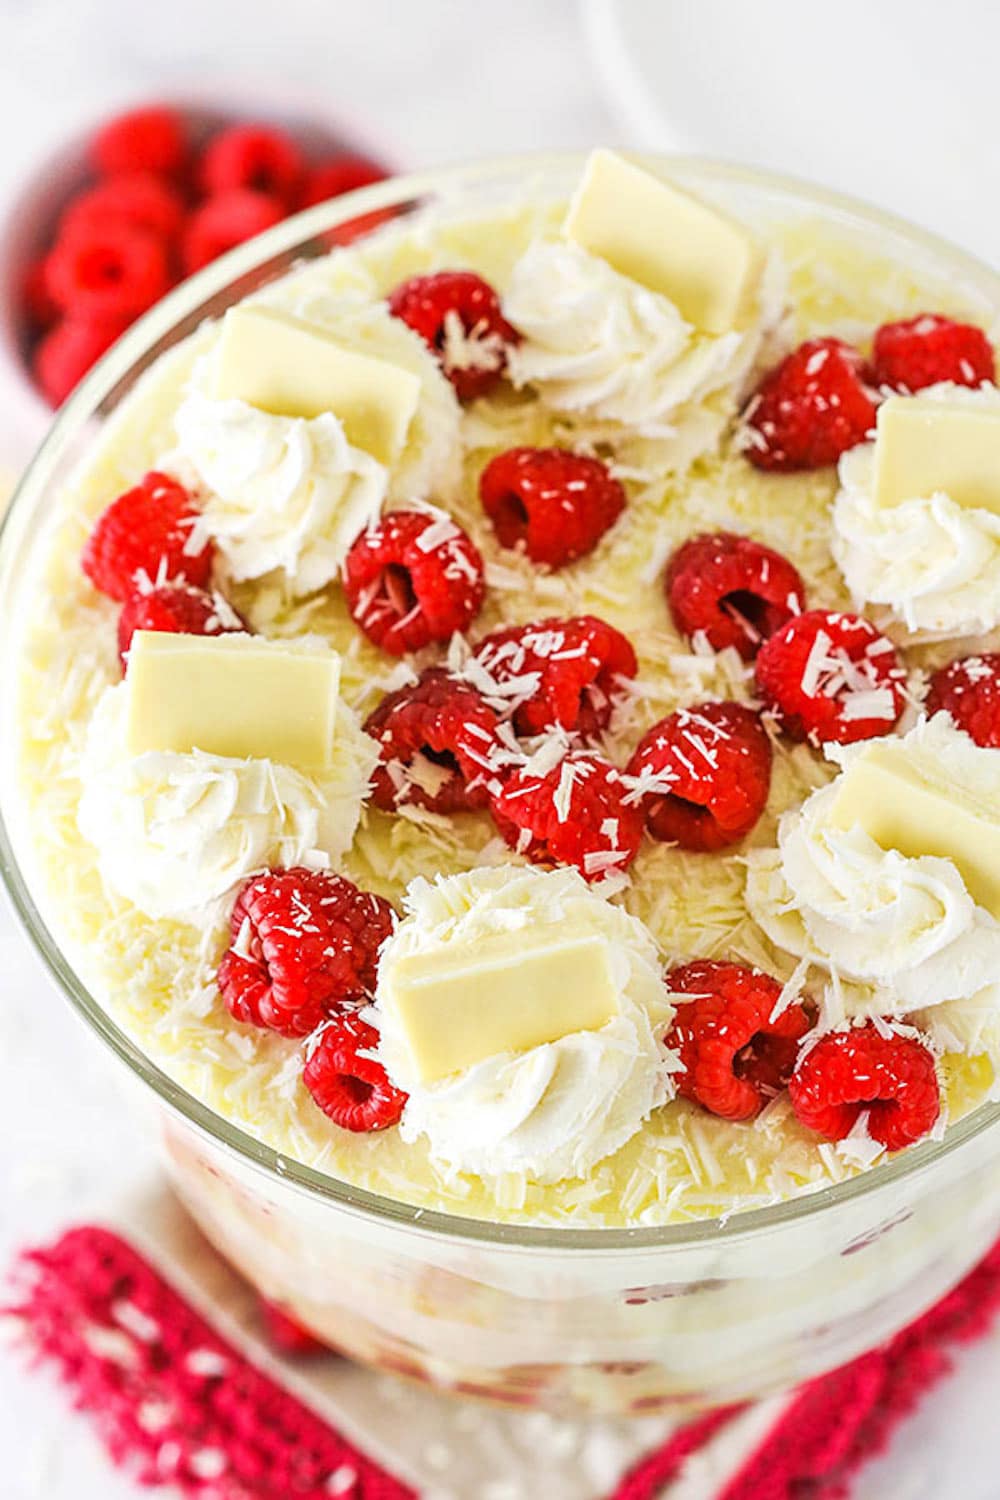 A White Chocolate Raspberry Trifle Next to a Bowl of Raspberries, Seen from Above.